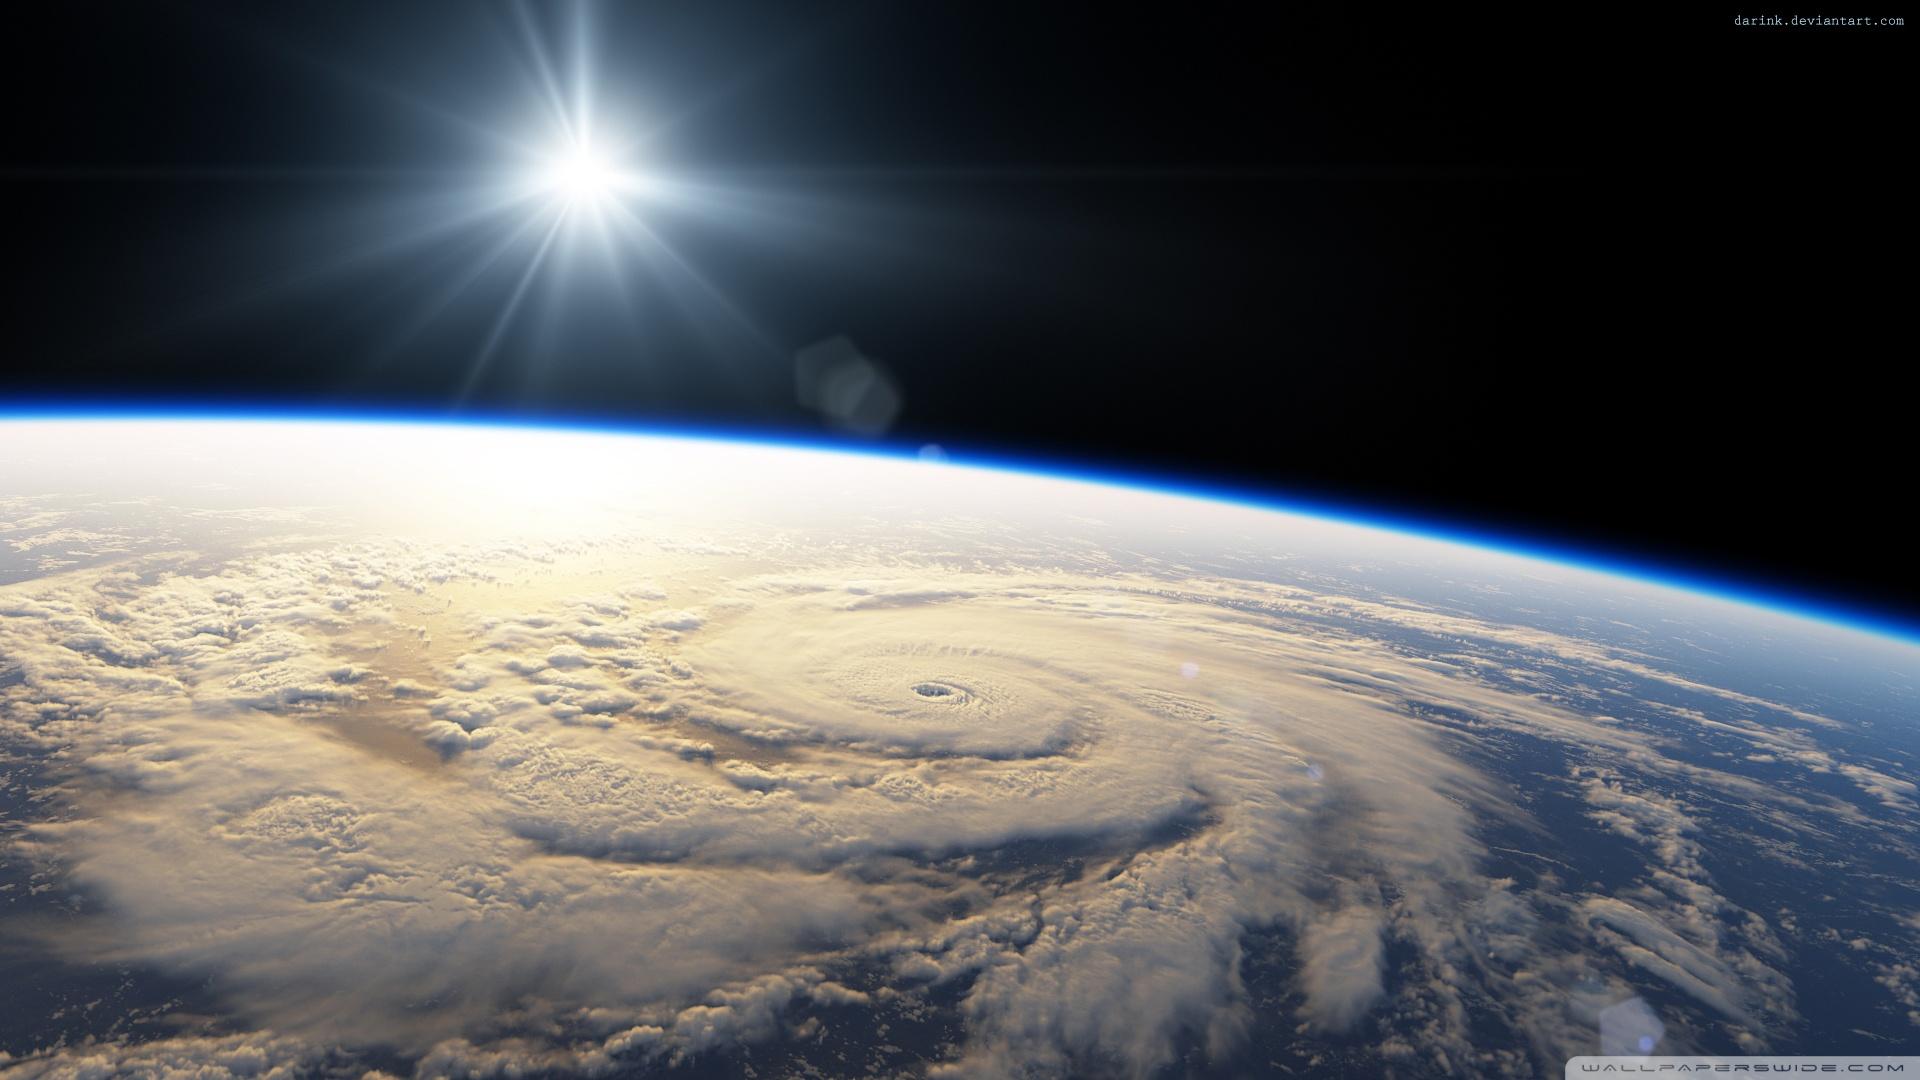 Hurricane And Cloud From Space Background, Picture Of Hurricane Eye  Background Image And Wallpaper for Free Download